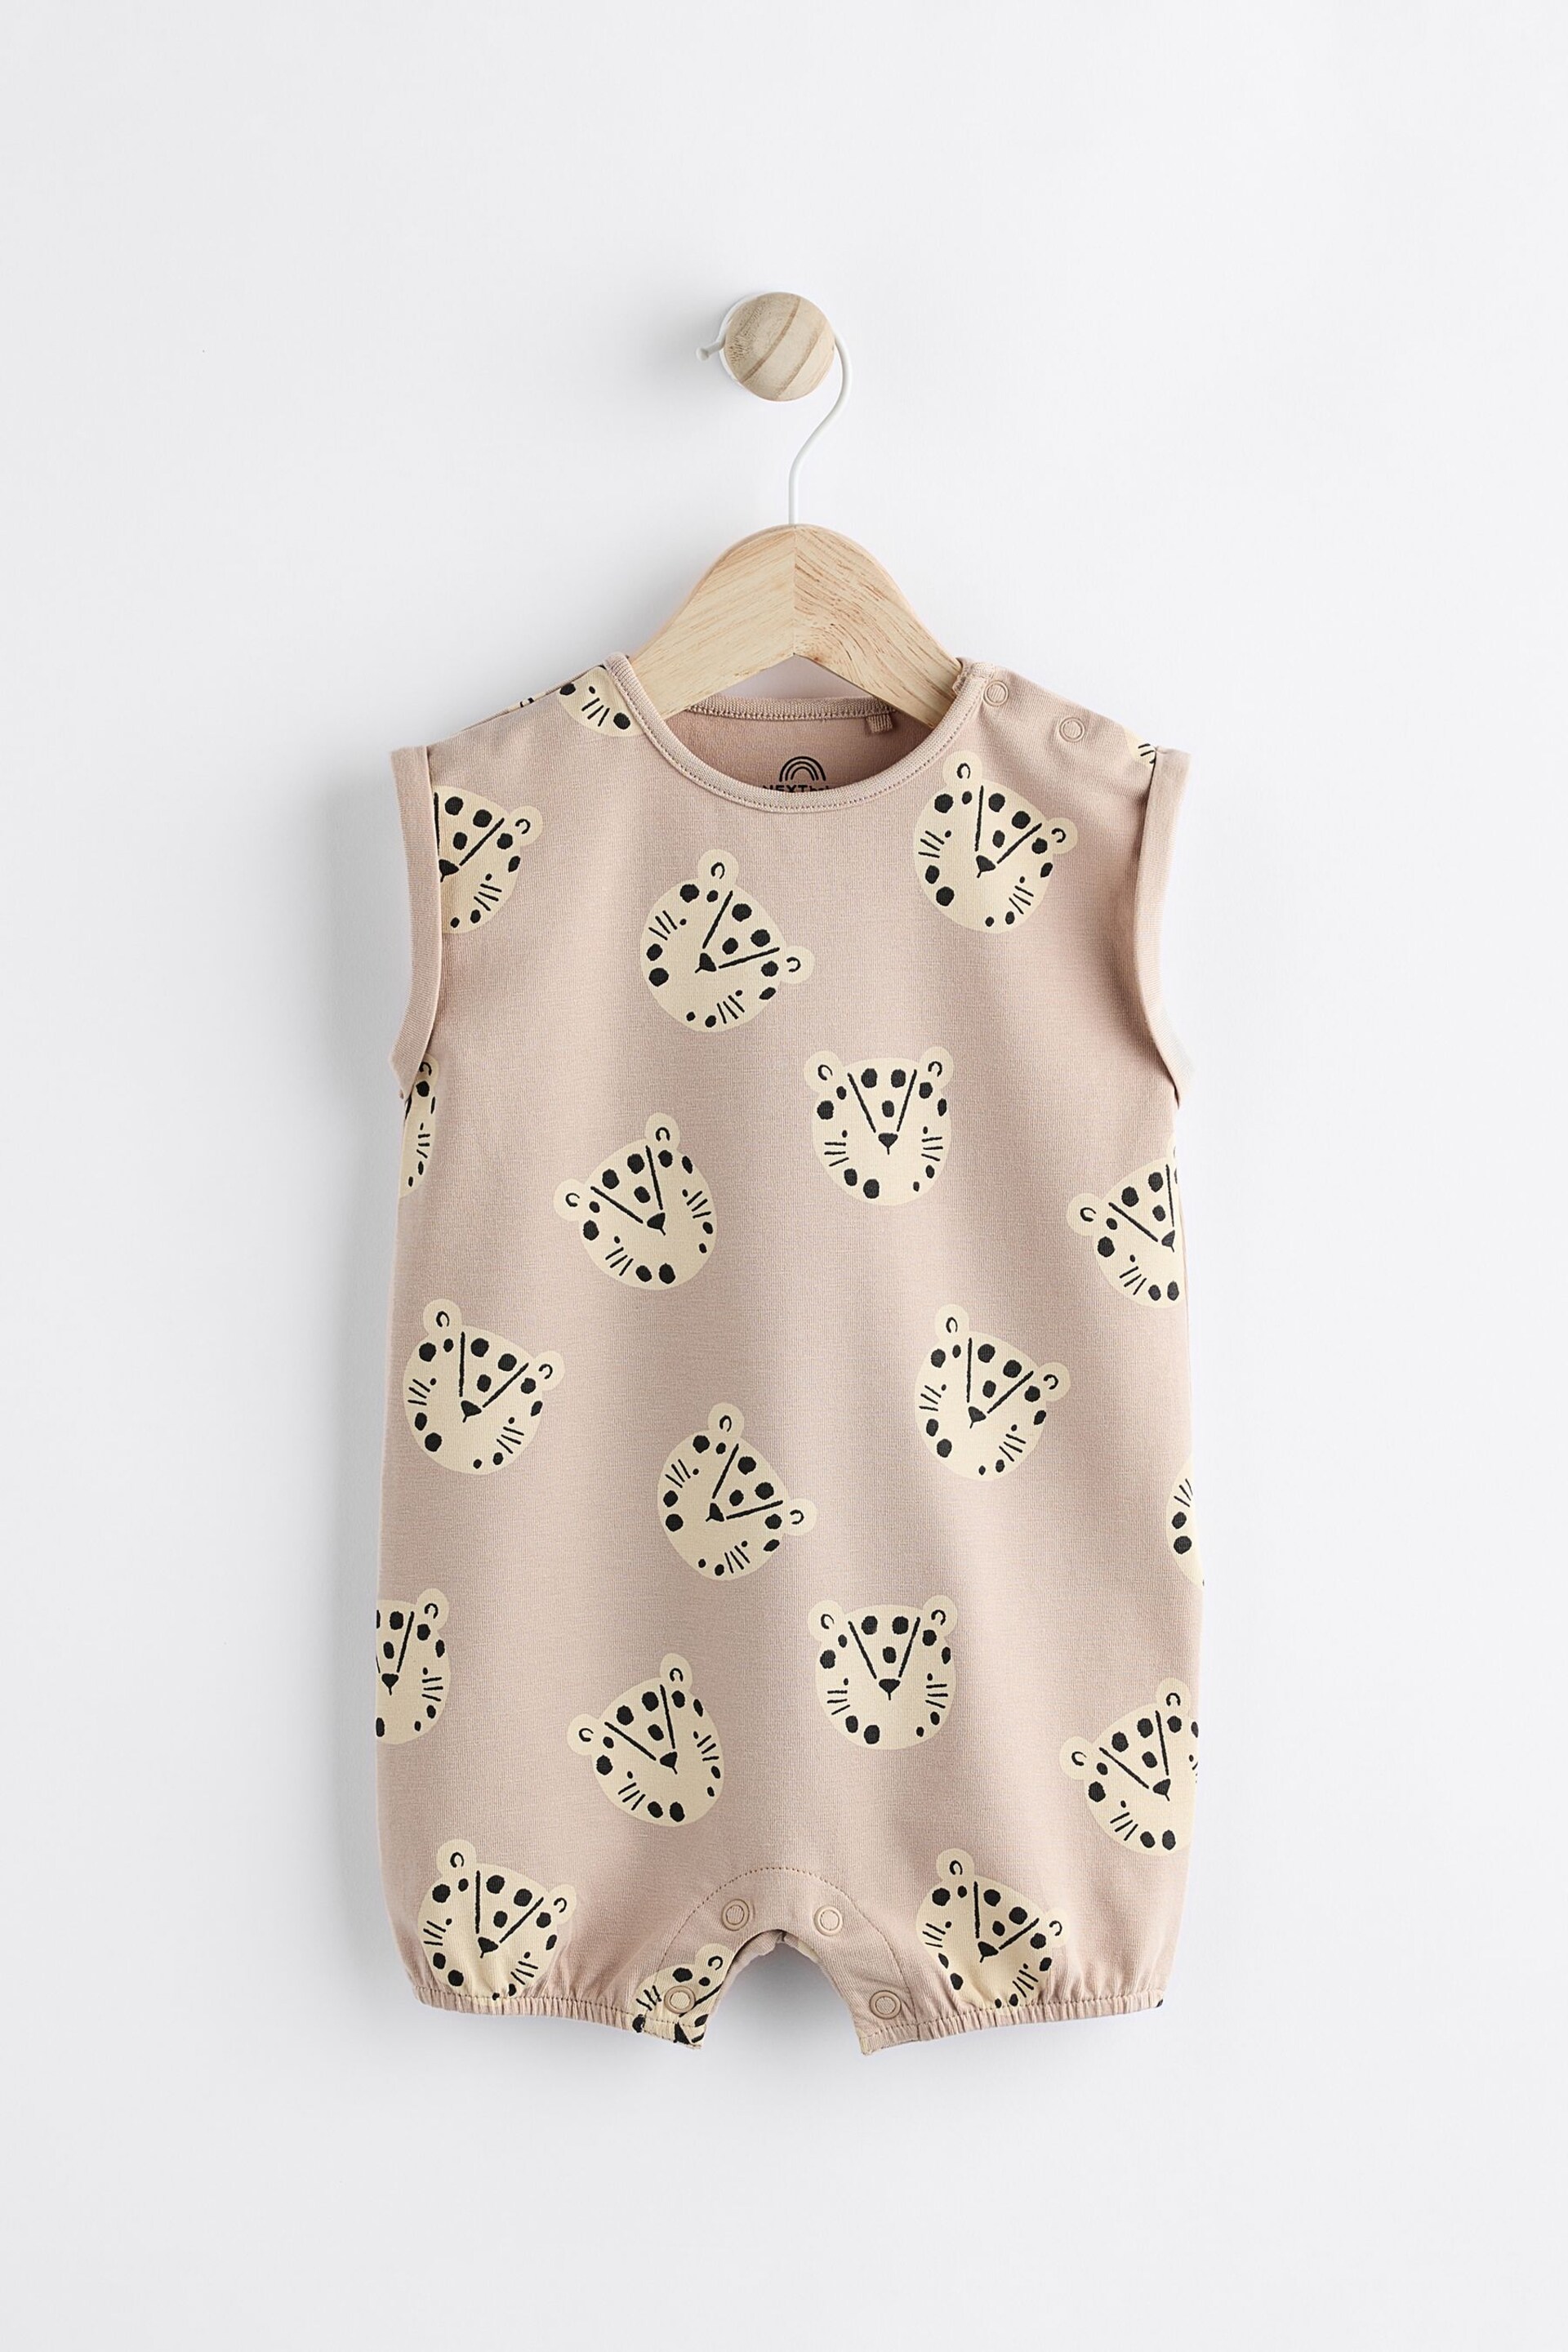 Neutral Cheetah Baby Jersey Romper - Image 5 of 10